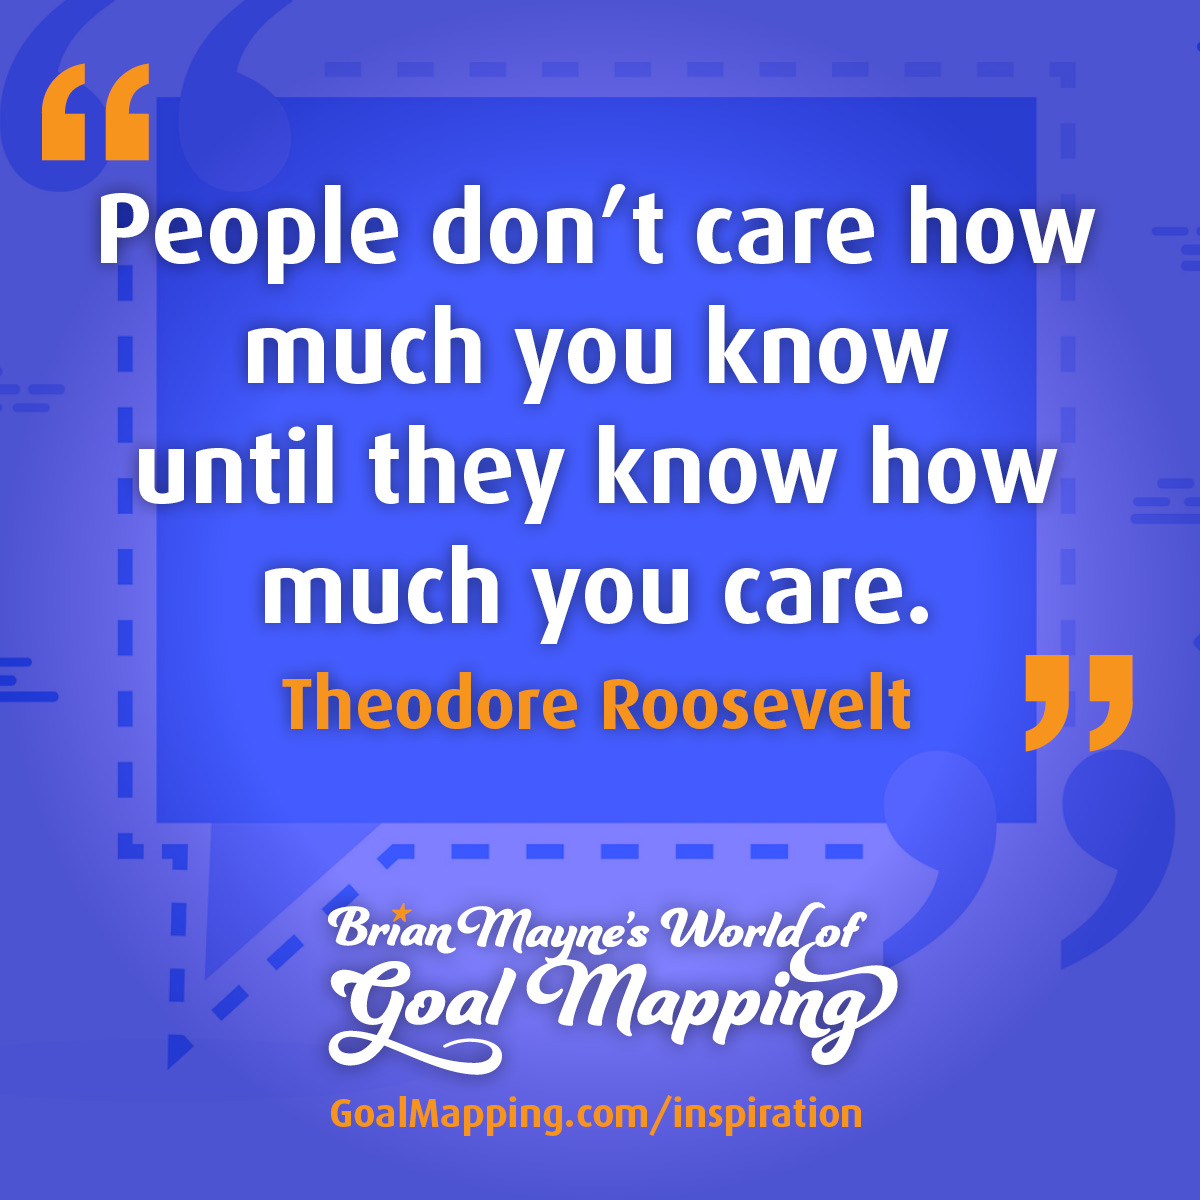 "People don’t care how much you know until they know how much you care." Theodore Roosevelt